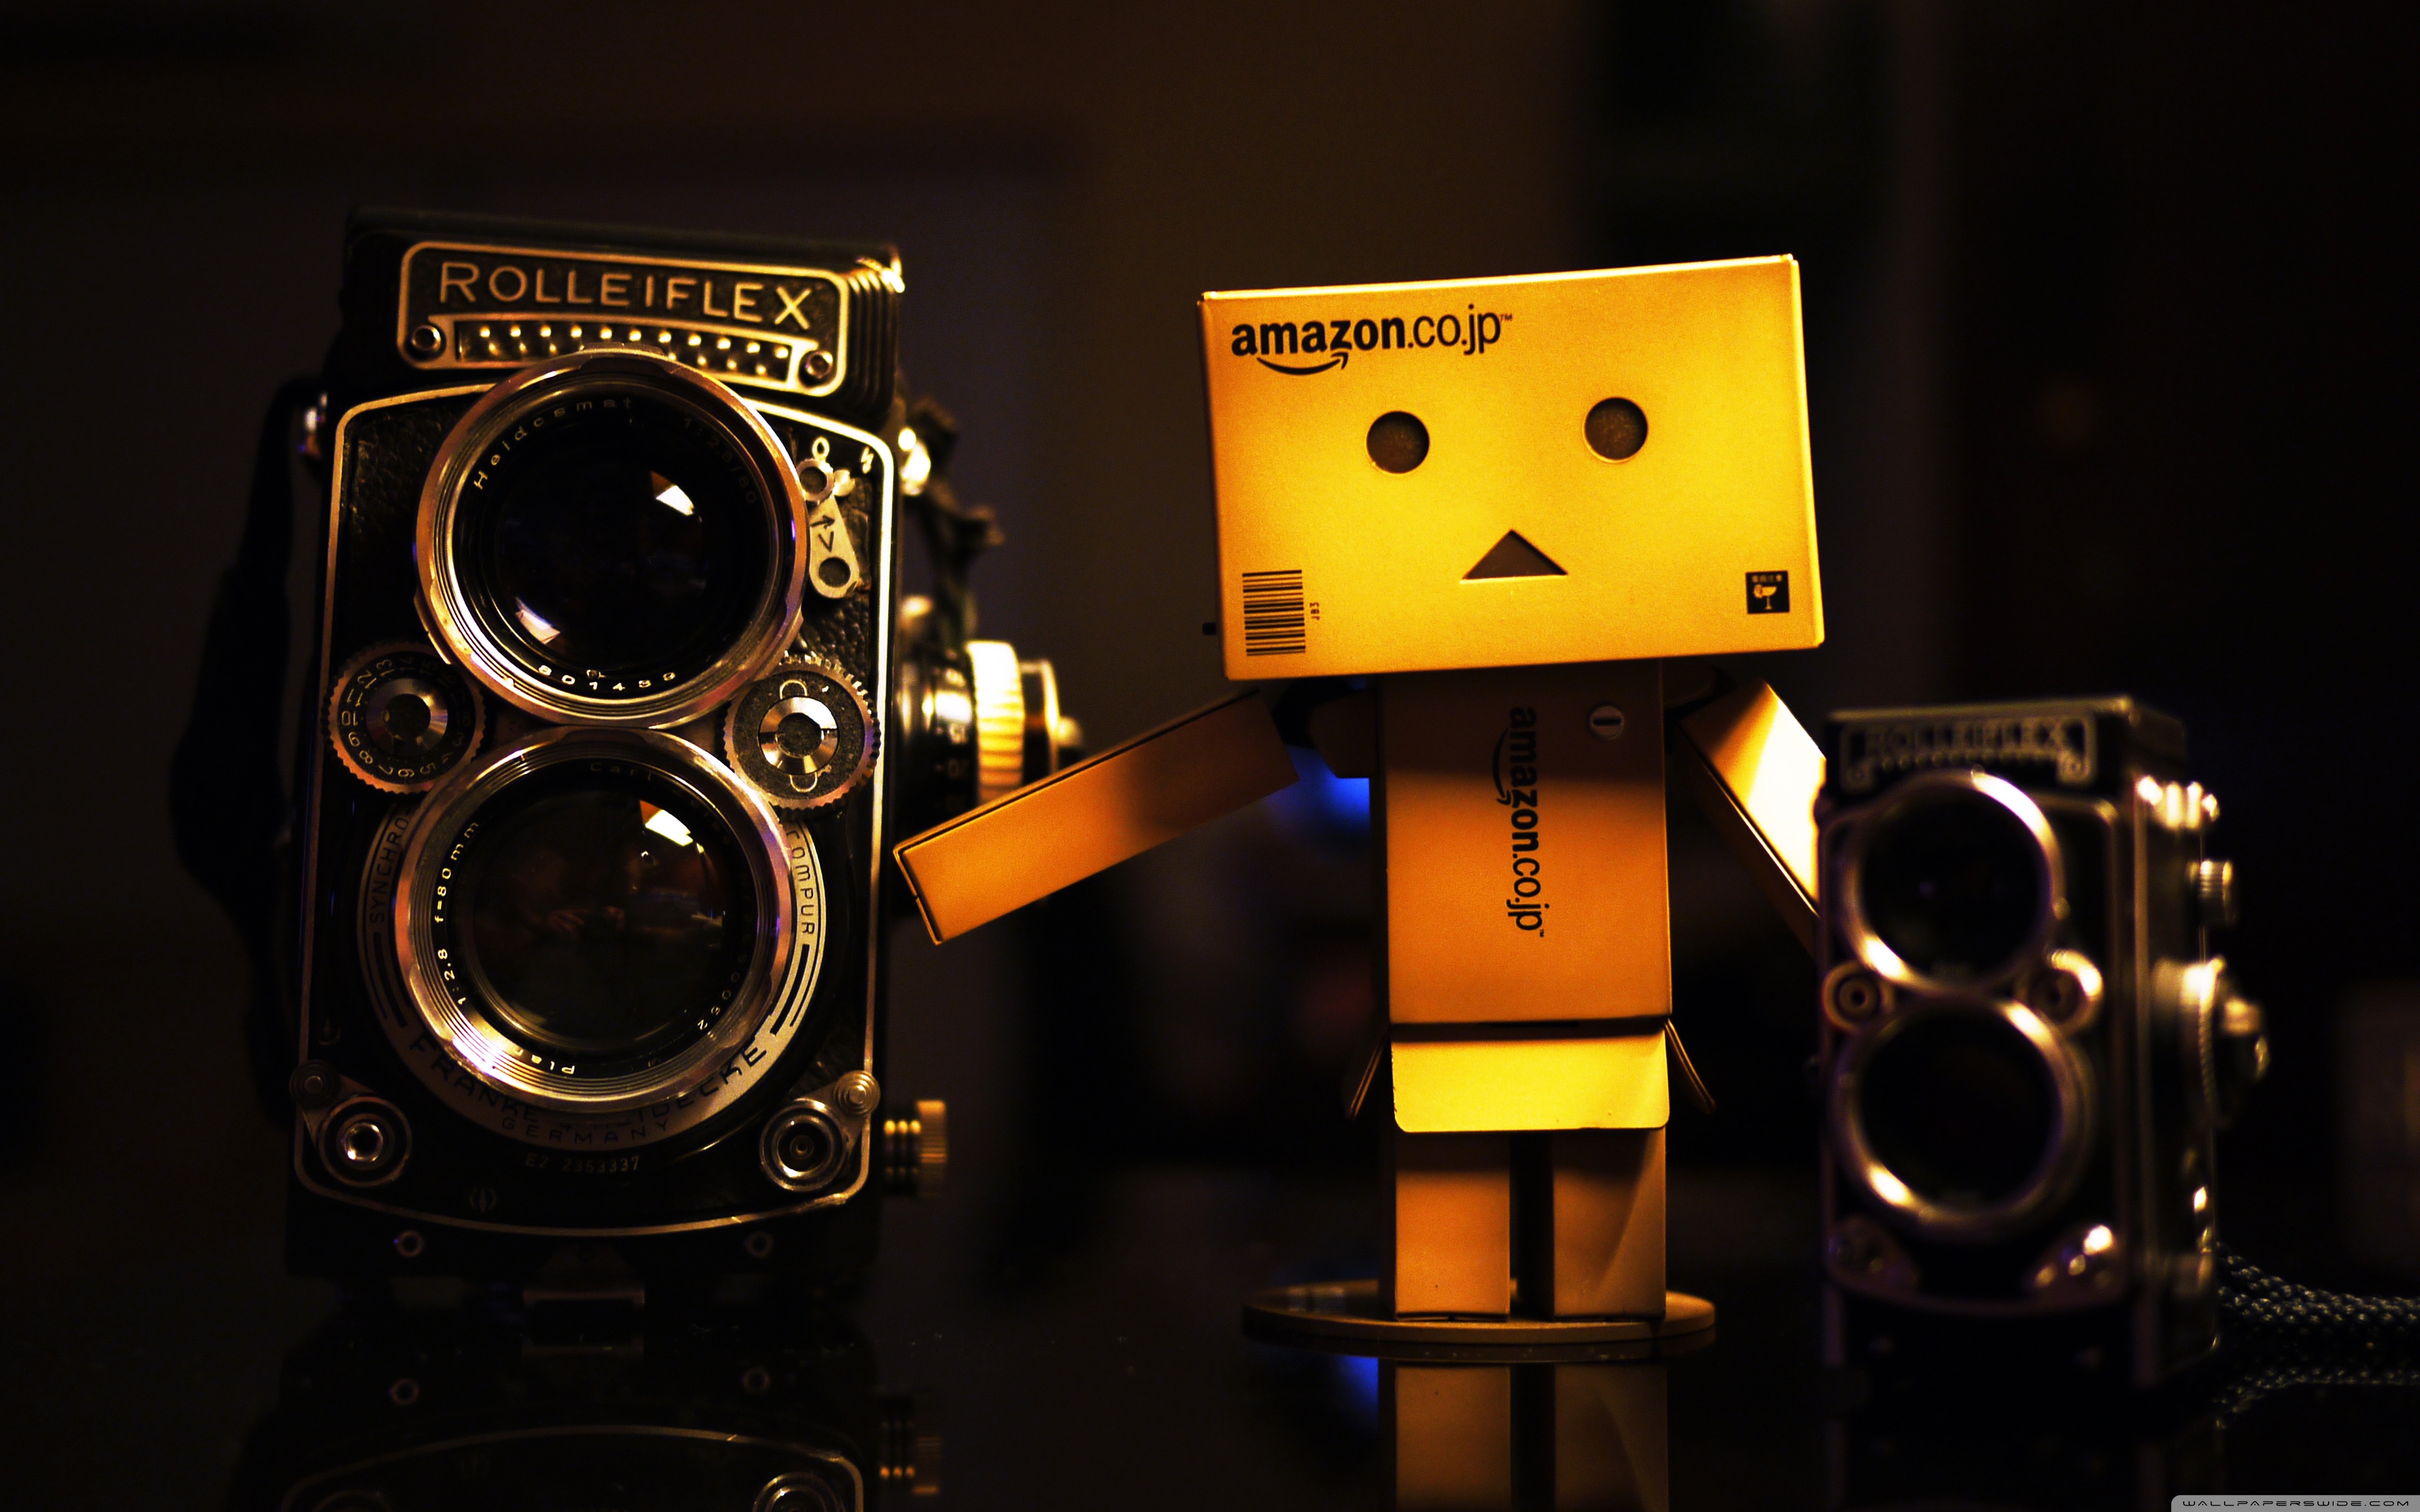 Danbo And Rolleiflex Wallpaper 3840x2400 Wallpapers Hd Desktop And Mobile Backgrounds